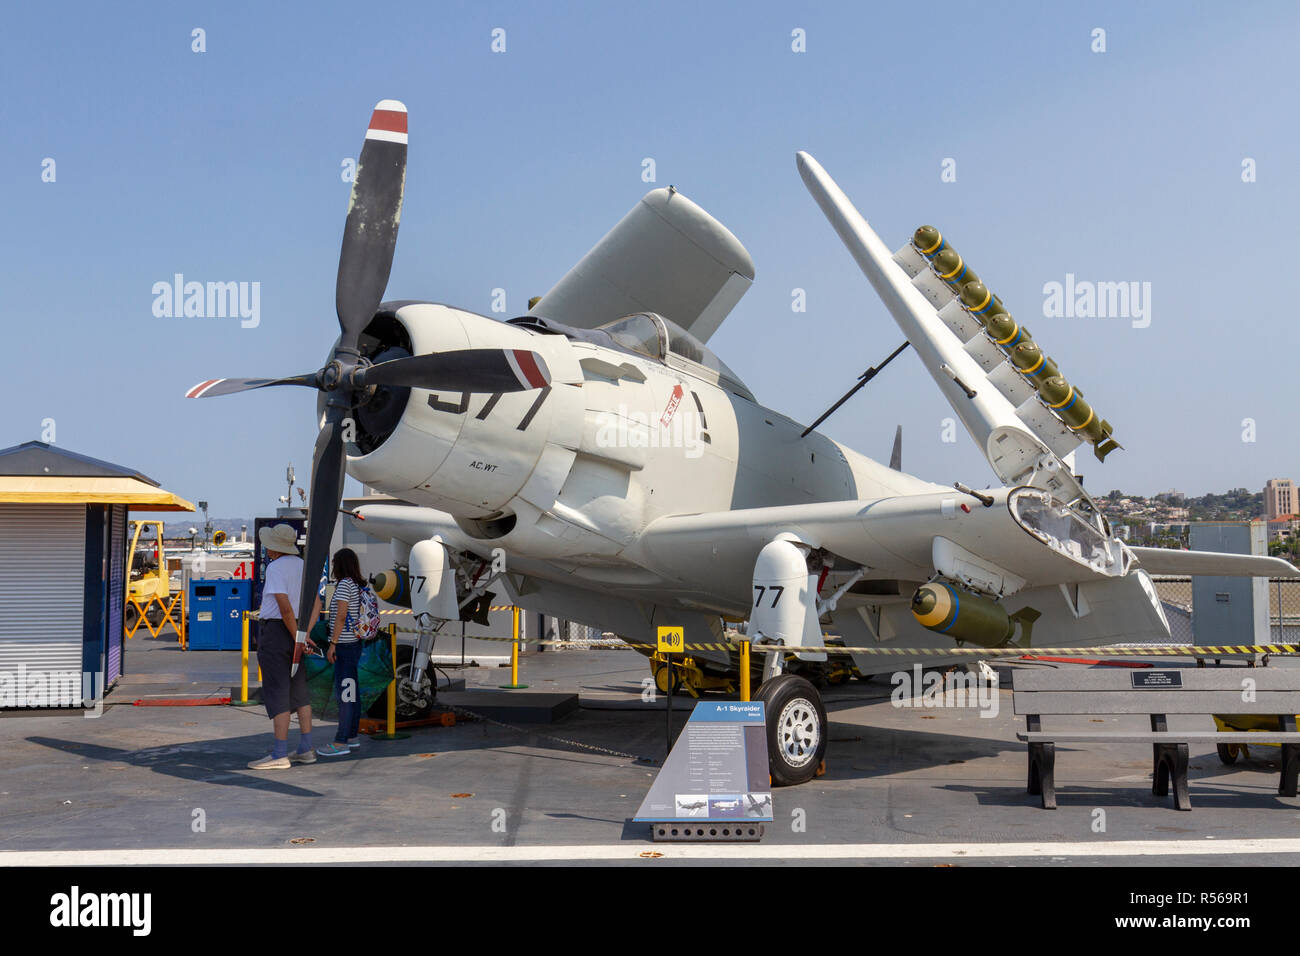 An A-1 Skyraider attack aircraft, USS Midway, San Diego, California, United States. Stock Photo